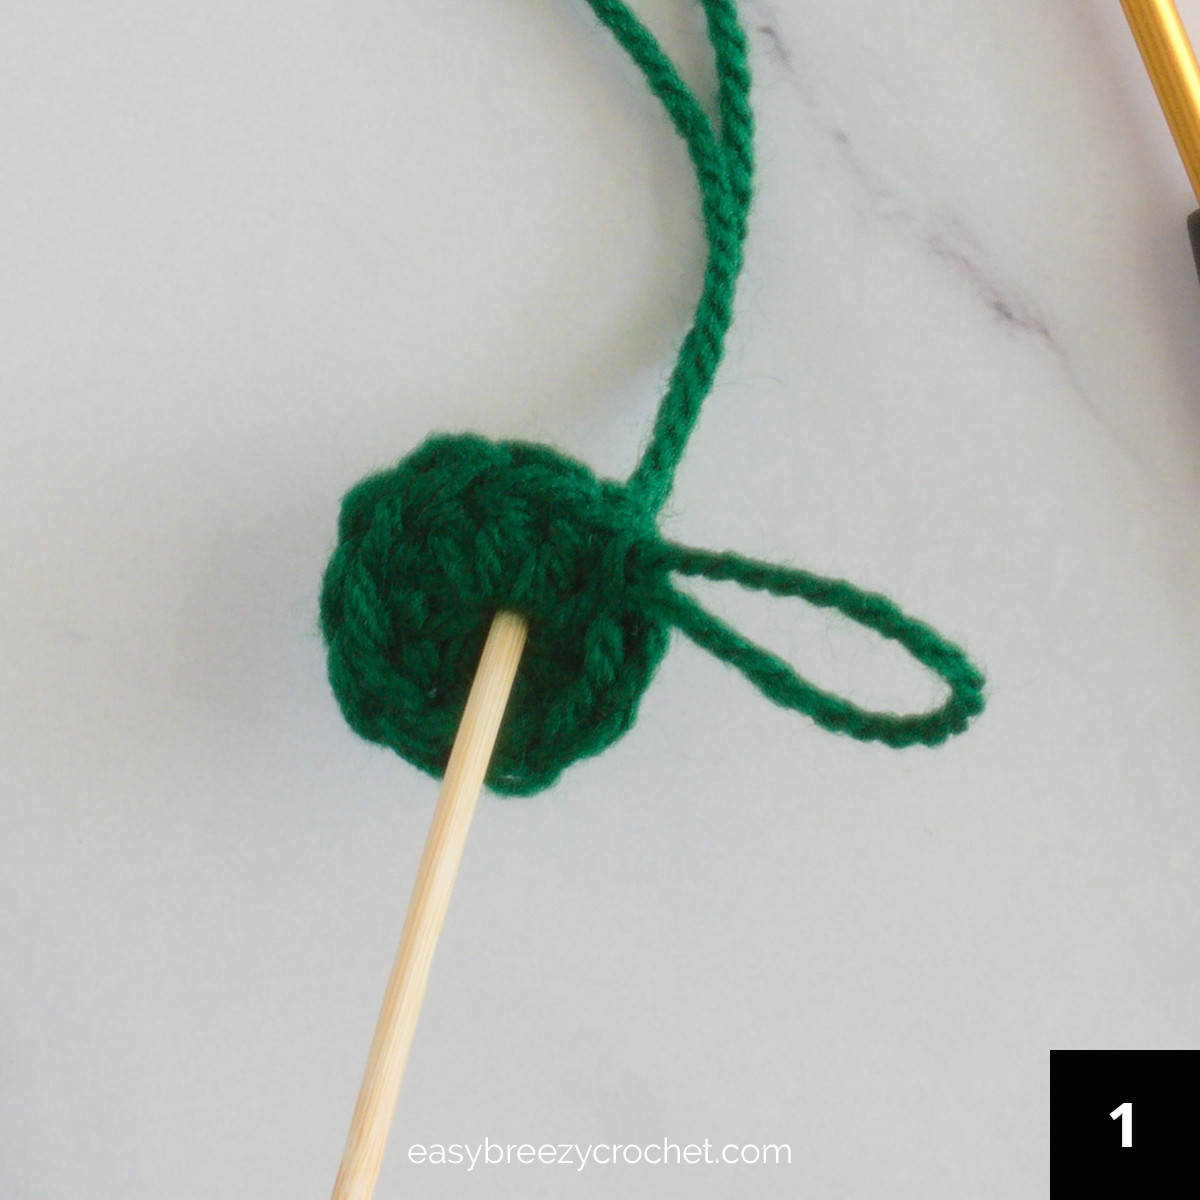 Image of a crochet circle and a bamboo skewer.